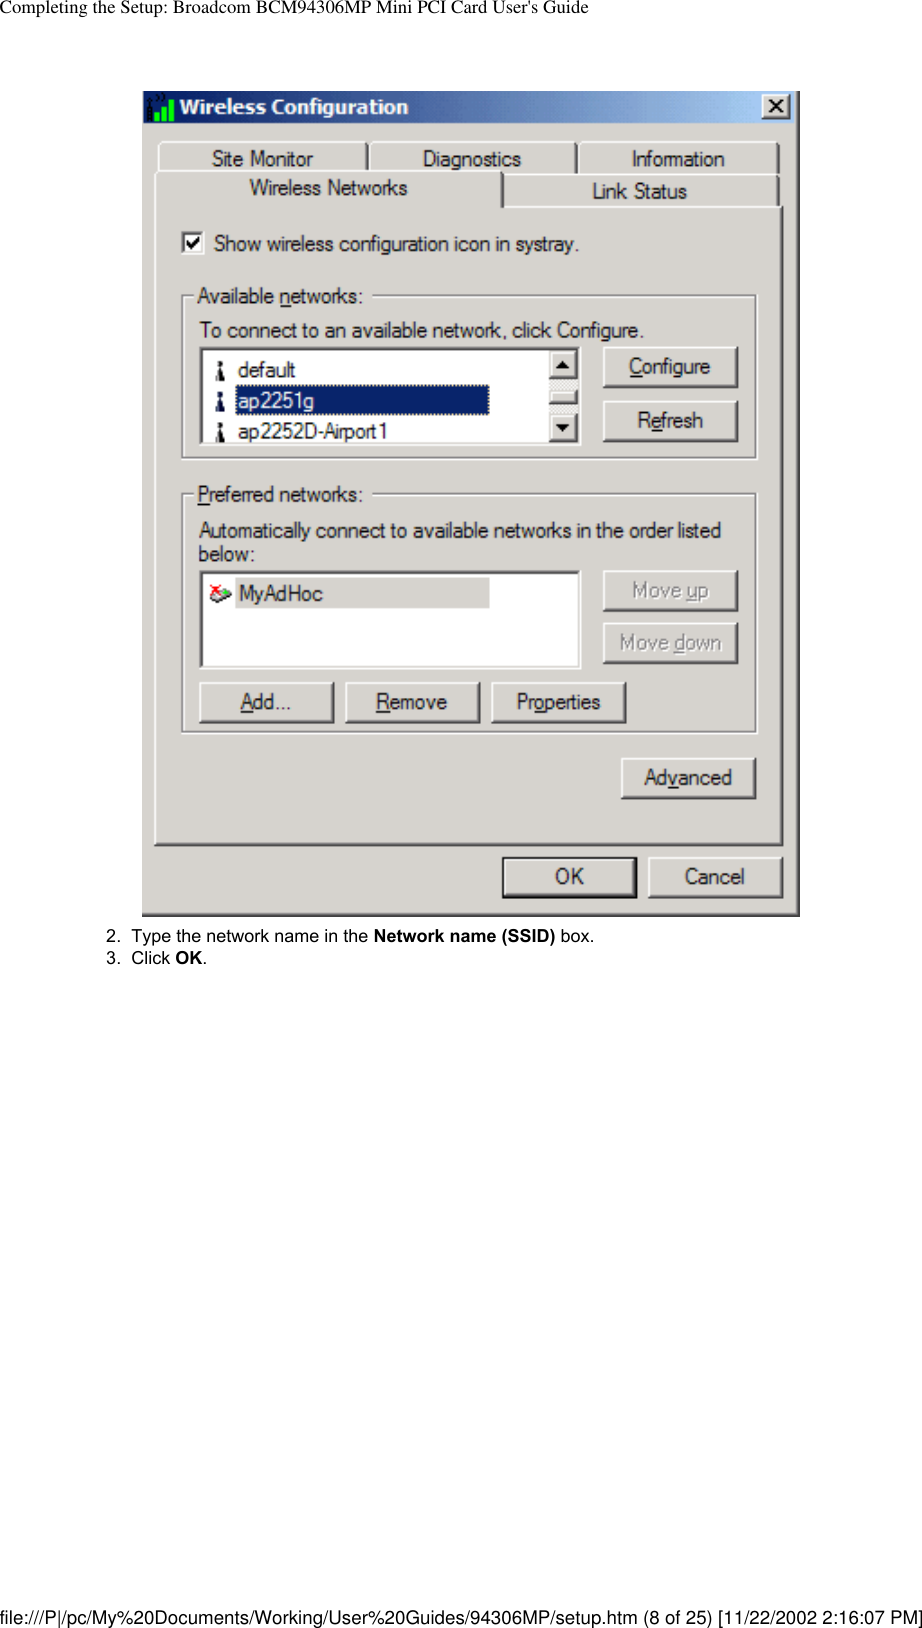 Completing the Setup: Broadcom BCM94306MP Mini PCI Card User&apos;s Guide2.  Type the network name in the Network name (SSID) box.3.  Click OK. file:///P|/pc/My%20Documents/Working/User%20Guides/94306MP/setup.htm (8 of 25) [11/22/2002 2:16:07 PM]